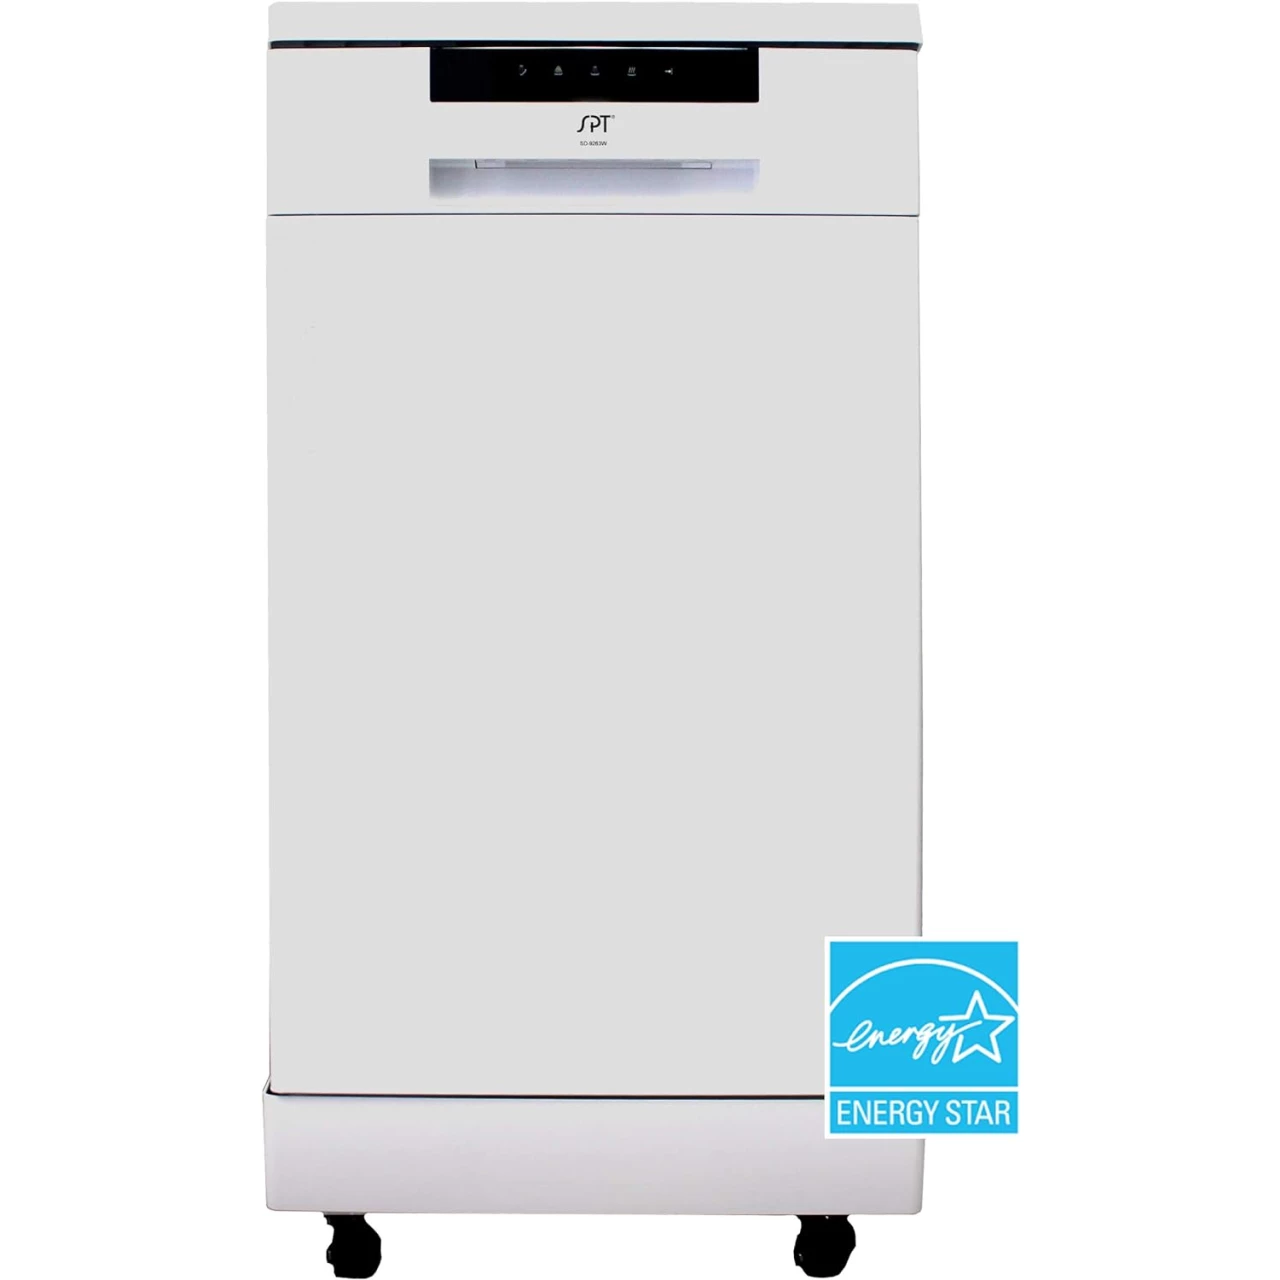 SPT SD-9263W 18″ Wide Portable Dishwasher with ENERGY STAR, 6 Wash Programs, 8 Place Settings and Stainless Steel Tub - White